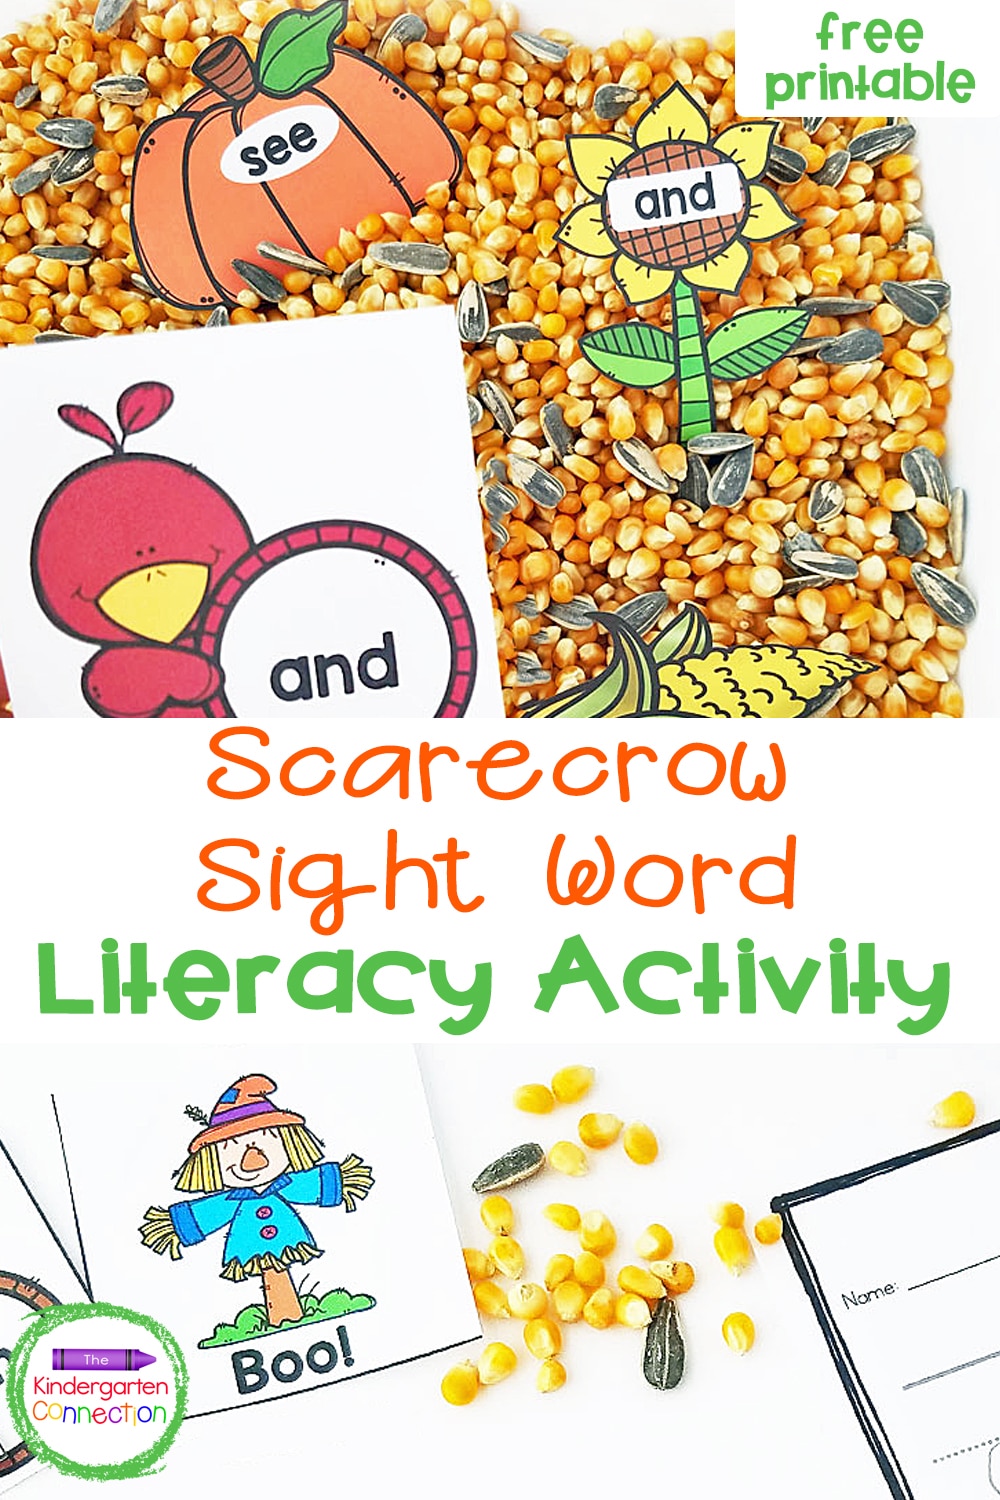 Scarecrow Sight Word Activity, FREE Printable for Kindergarten and First grades! 